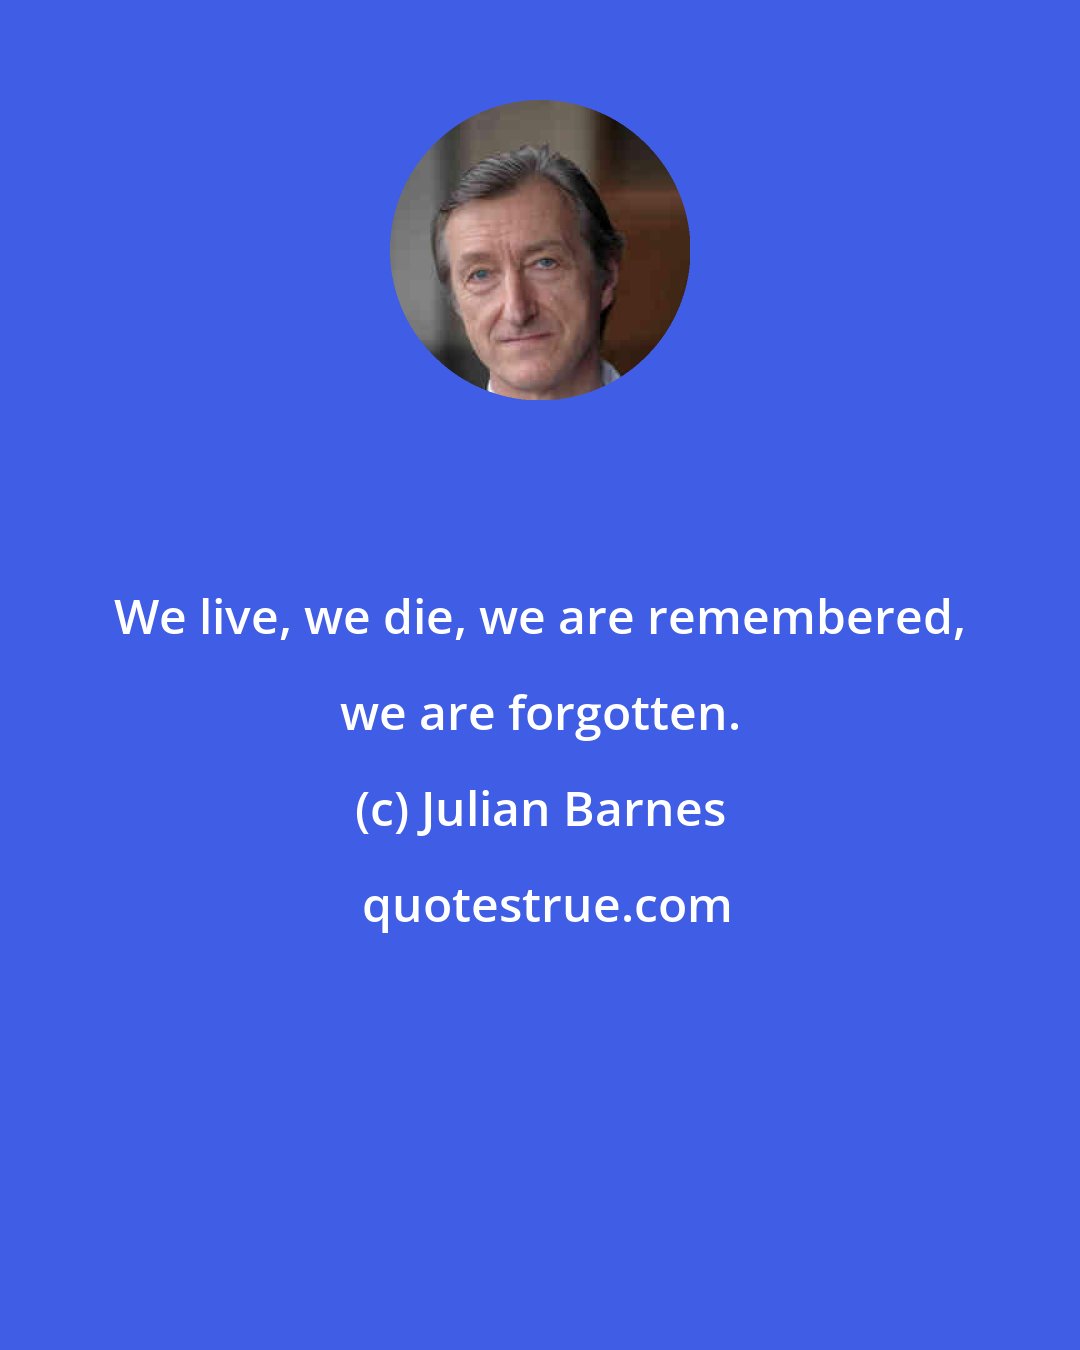 Julian Barnes: We live, we die, we are remembered, we are forgotten.